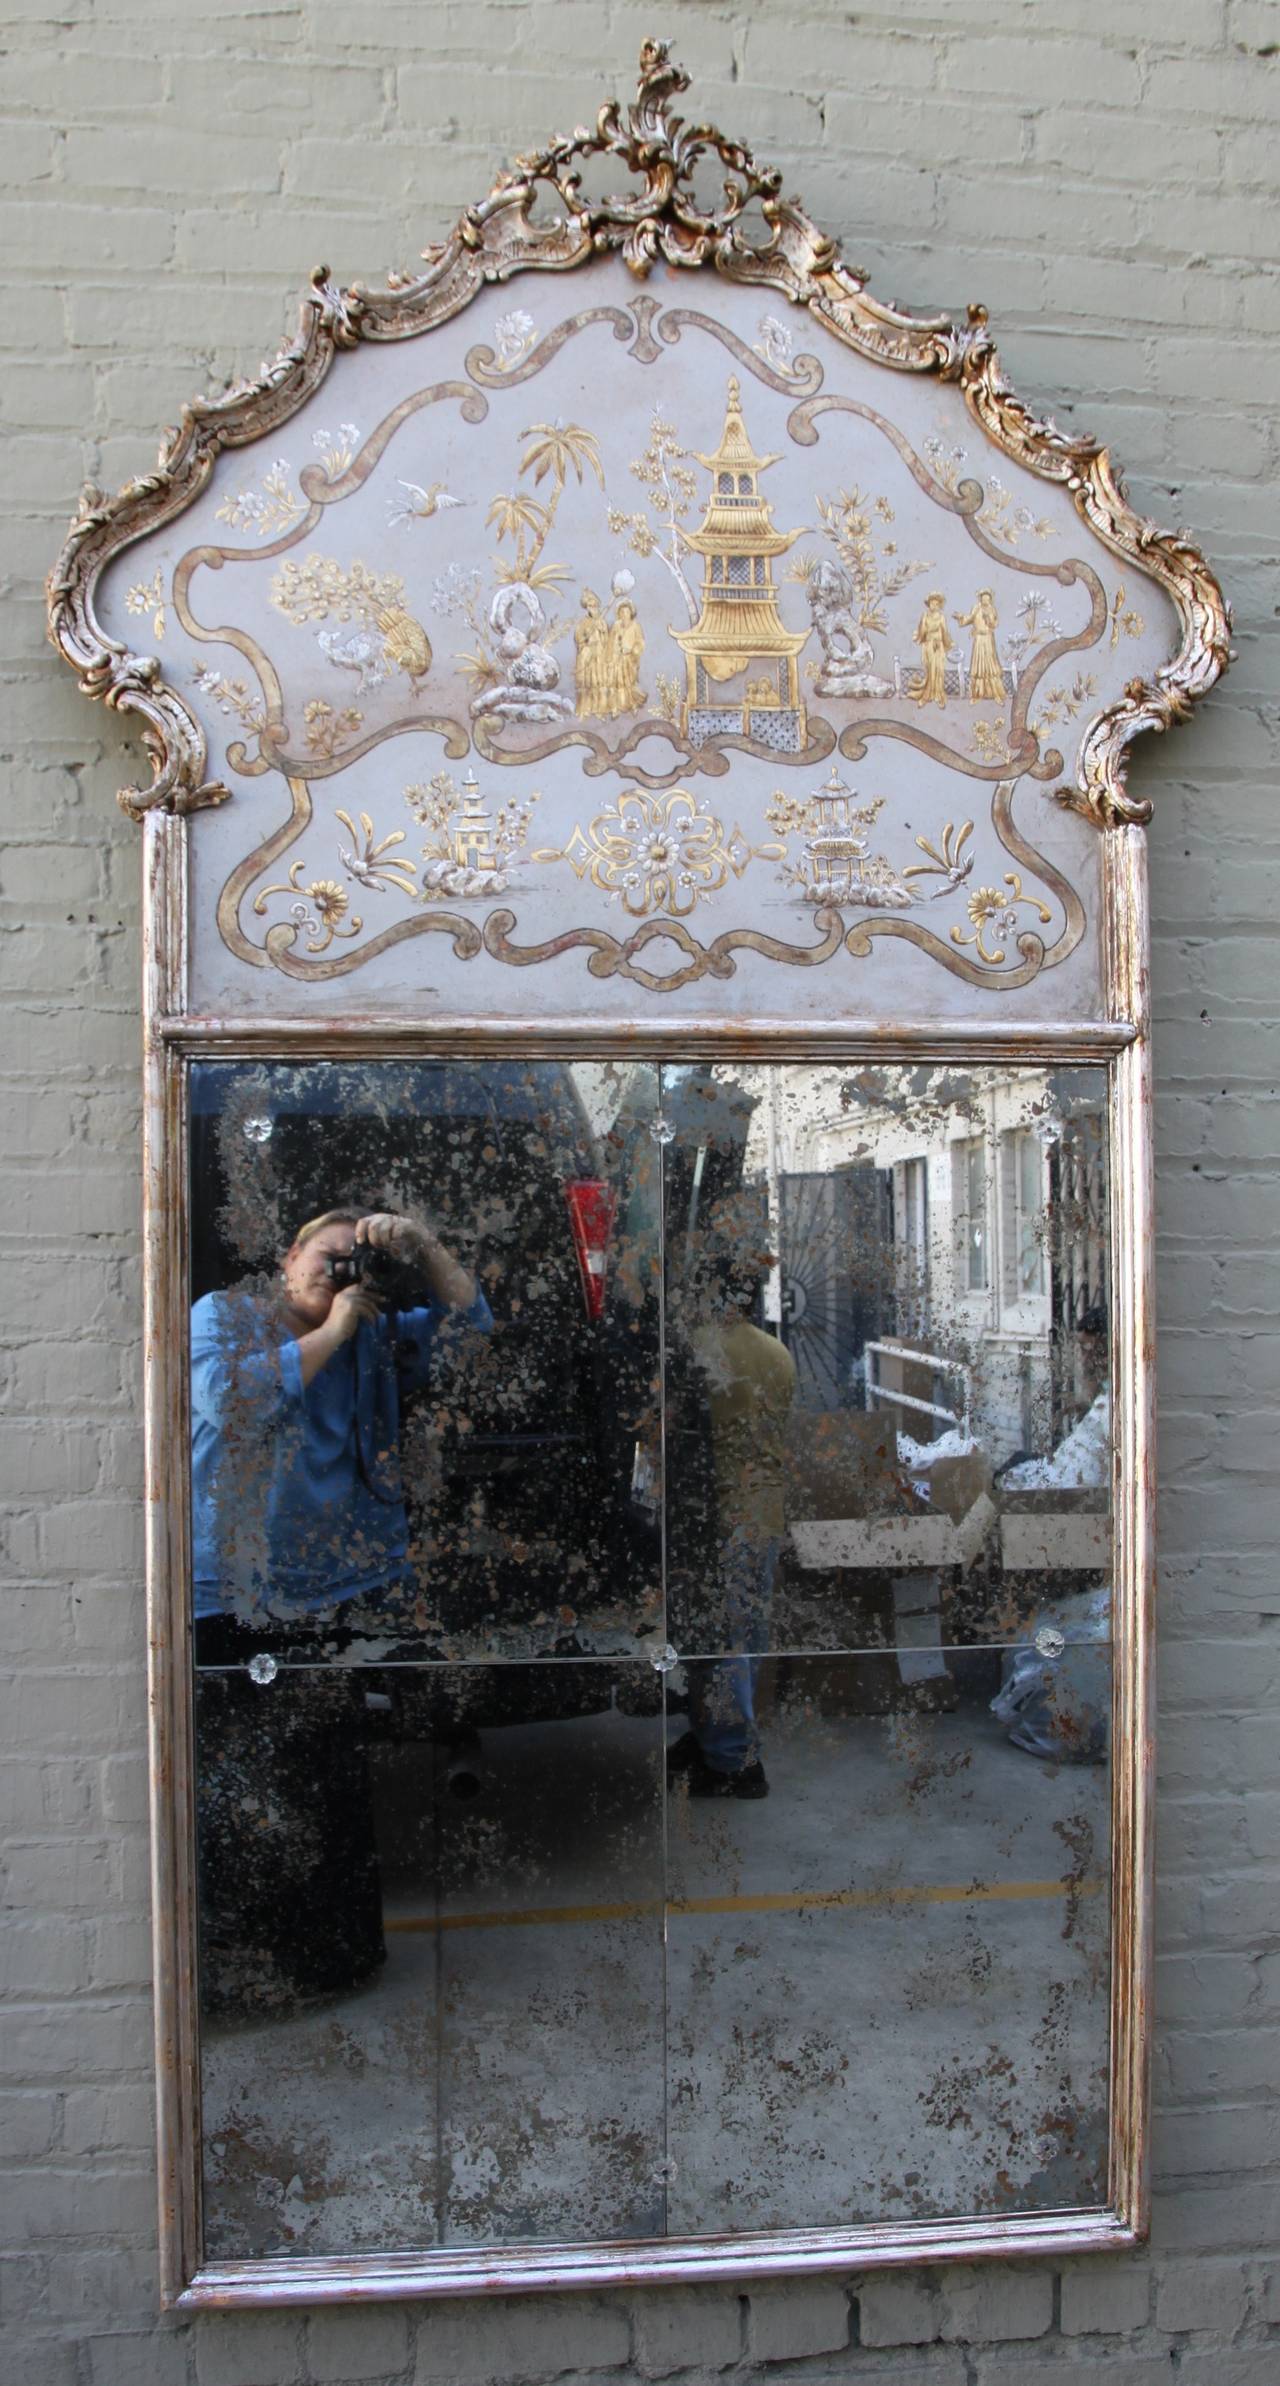 Pair of monumental scaled Italian gold and silver chinoiserie painted mirrors with antiqued mirror sectioned in four pieces and connected with crystal rosettes.